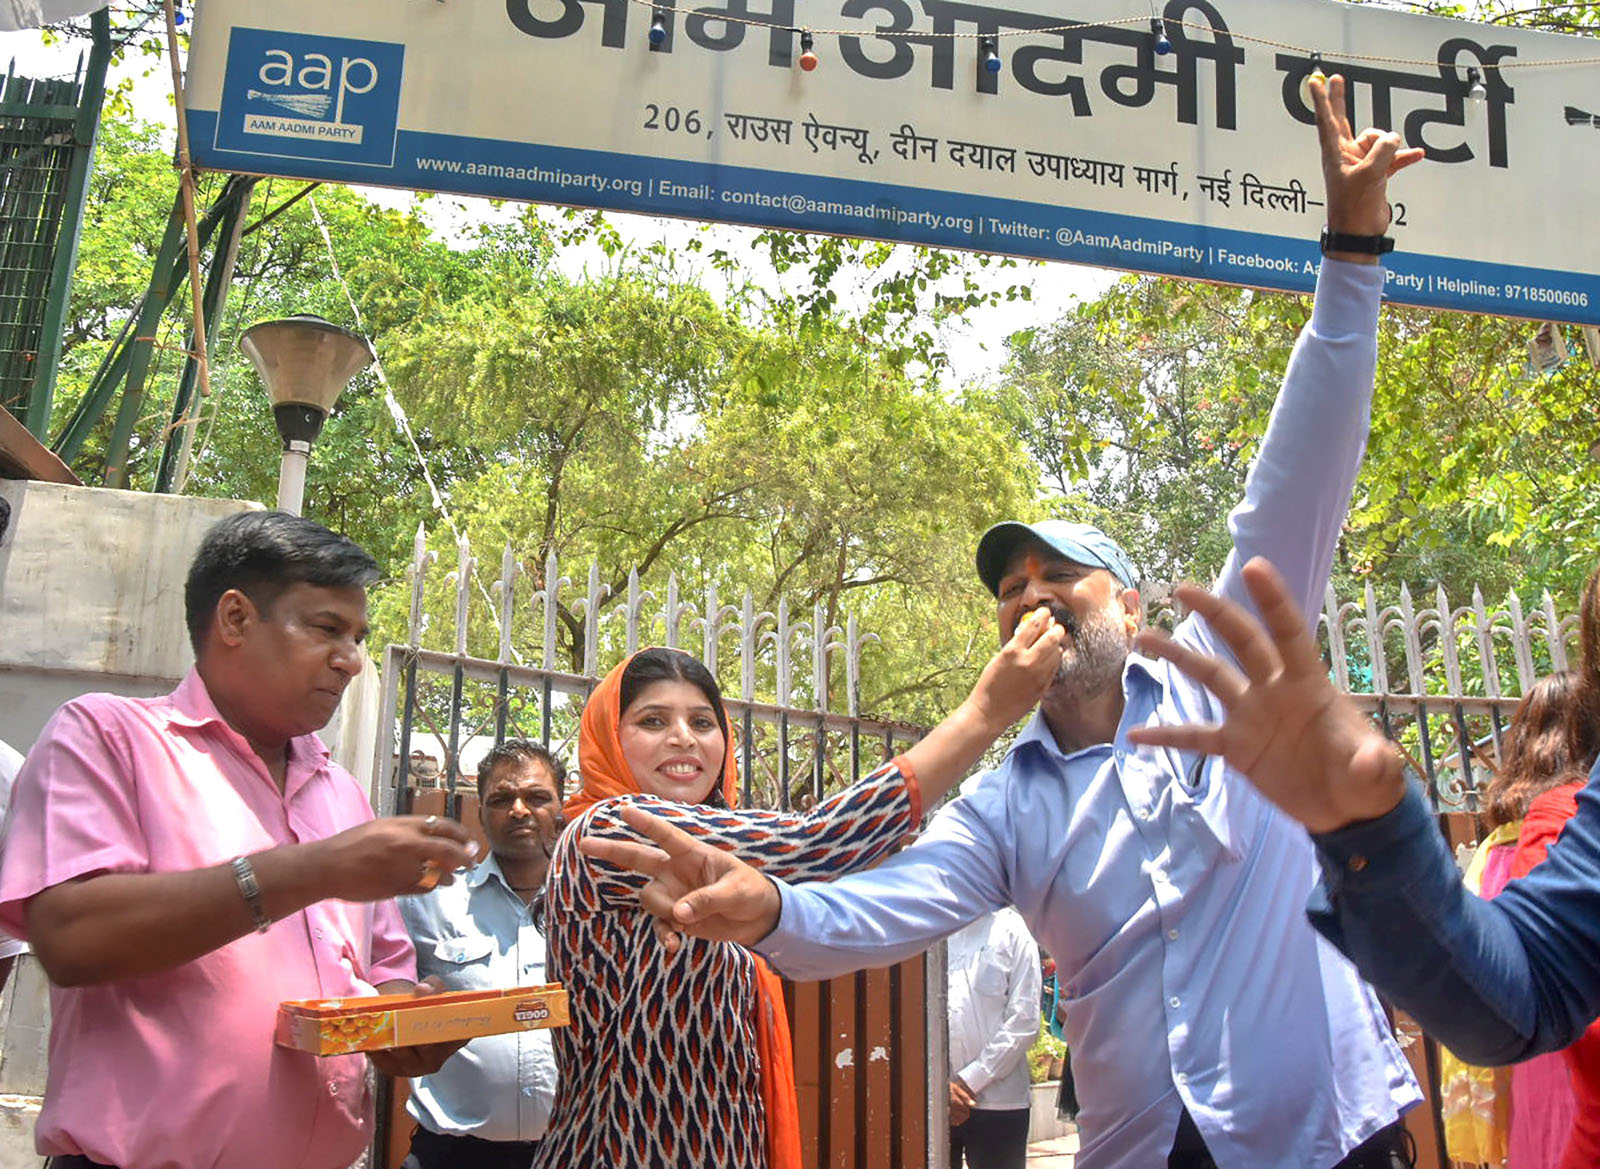 New Delhi: Aam Aadmi Party (AAP) workers celebrate the verdict of Supreme Court on the power tussle between the Delhi government and the Centre decision, outside Party office, in New Delhi on Wednesday, July 04, 2018. (PTI Photo)(PTI7_4_2018_000068B) *** Local Caption ***